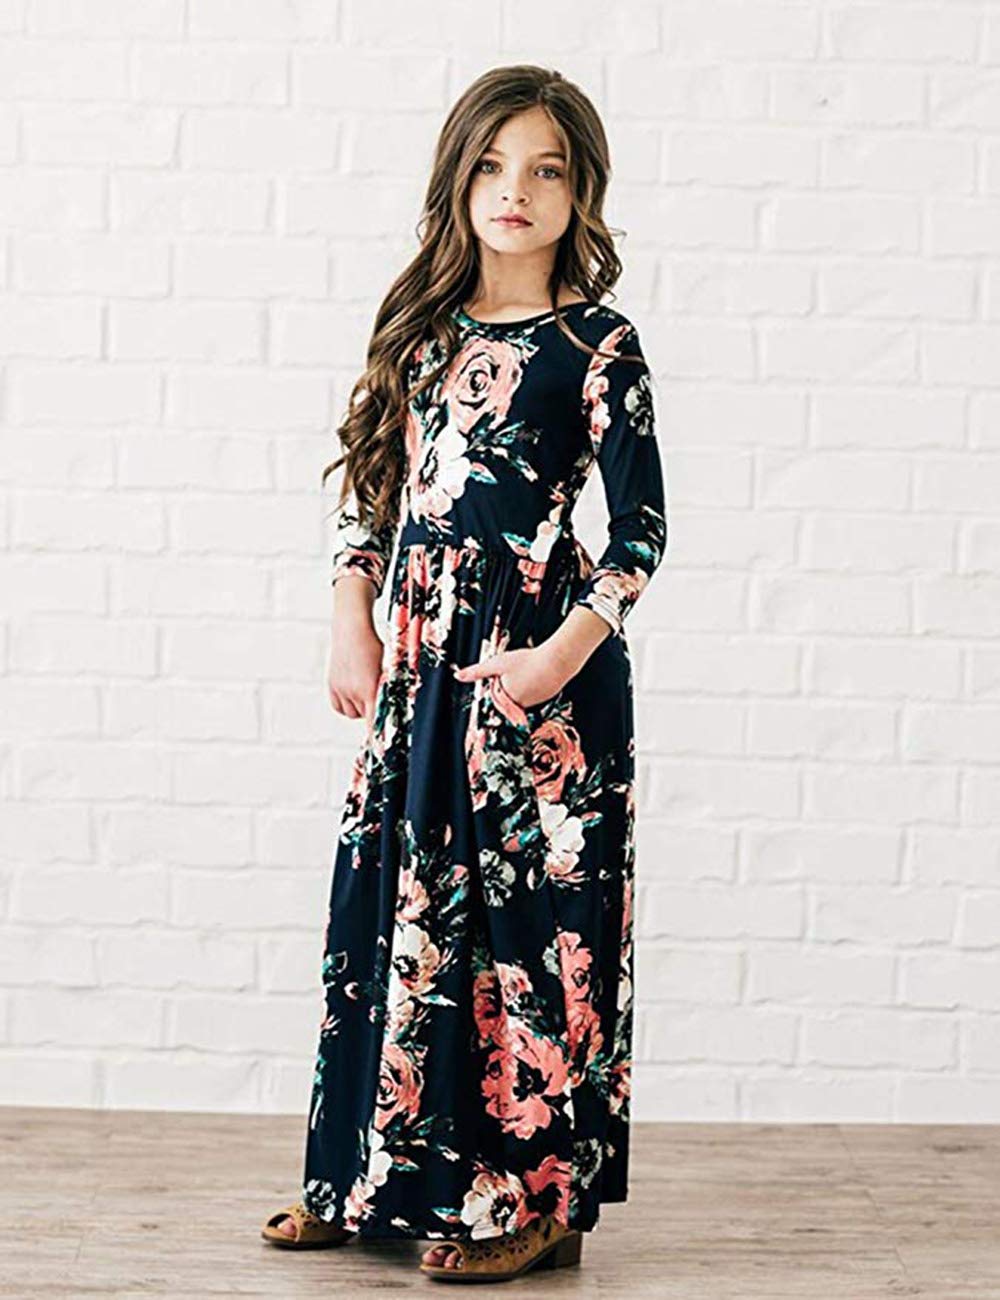 21KIDS Girls Maxi Dress Floral 3/4 Long Sleeve Dresses with Pockets for Girls 6-12 Years